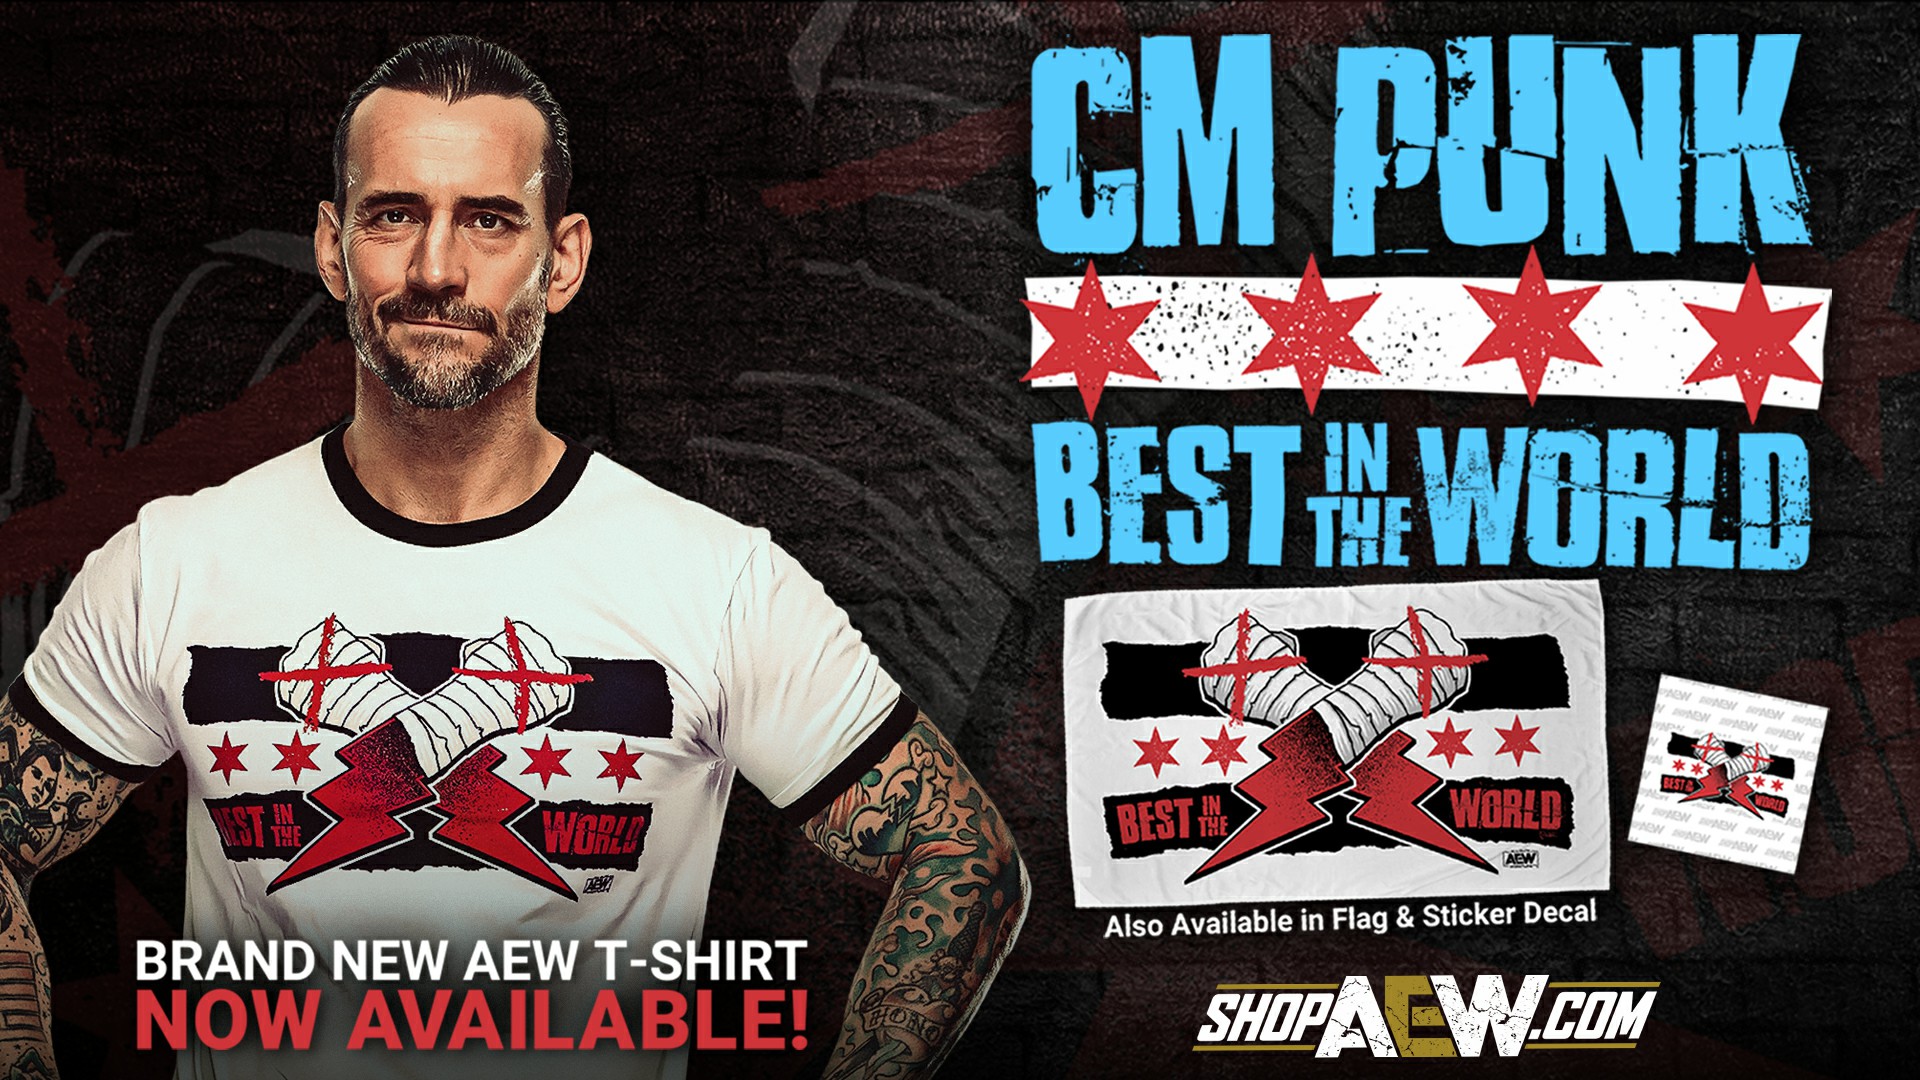 All Elite Wrestling Get The Brand New Cmpunk Gear Online Now At T Co Xtpduzx56r Exclusive I Was There Version Available At The Unitedcenter Tonight Only T Co Bjq65nbvg7 Twitter